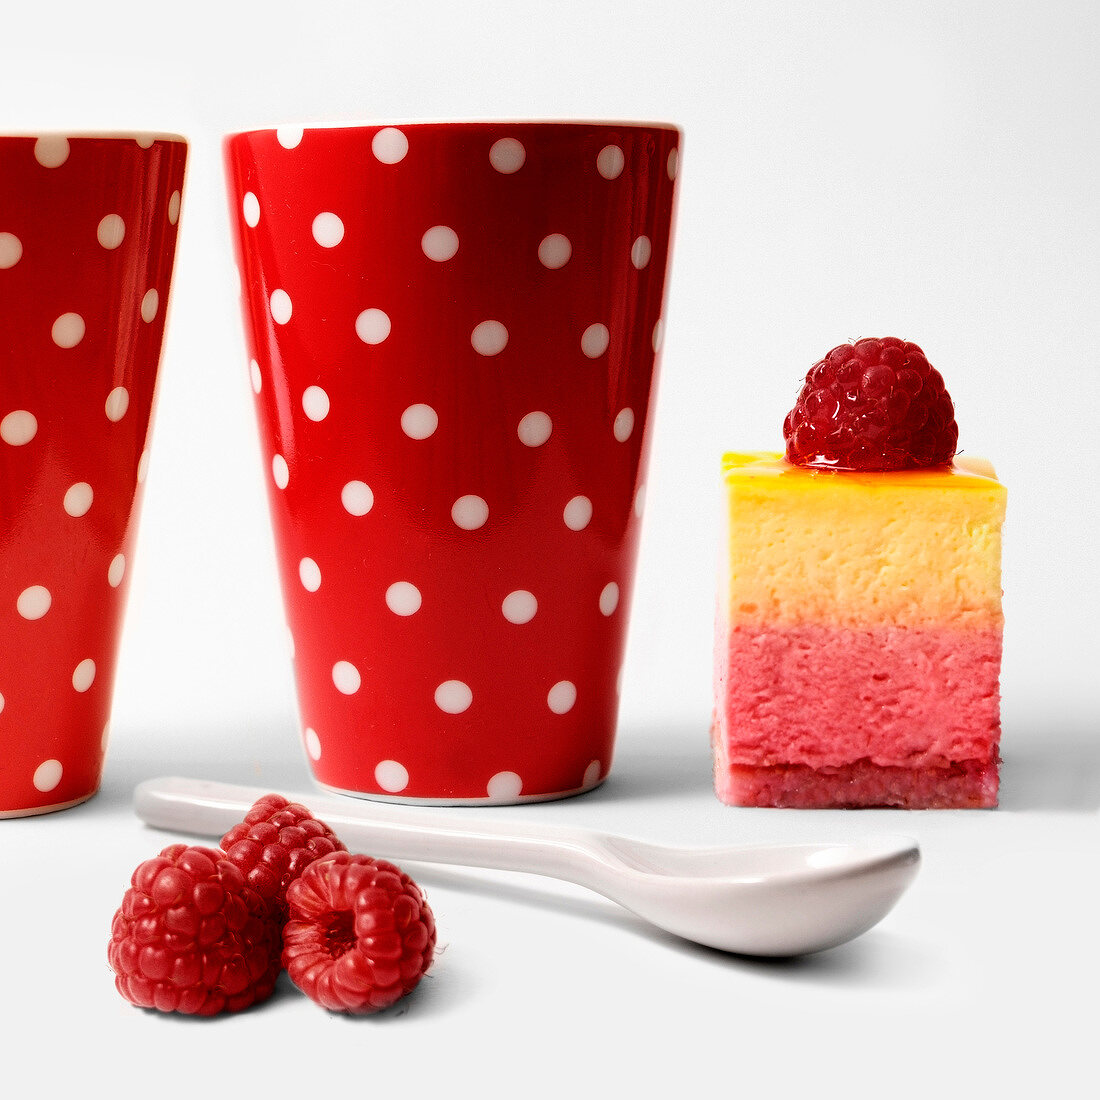 Piece of raspberry cake and two spotted cups